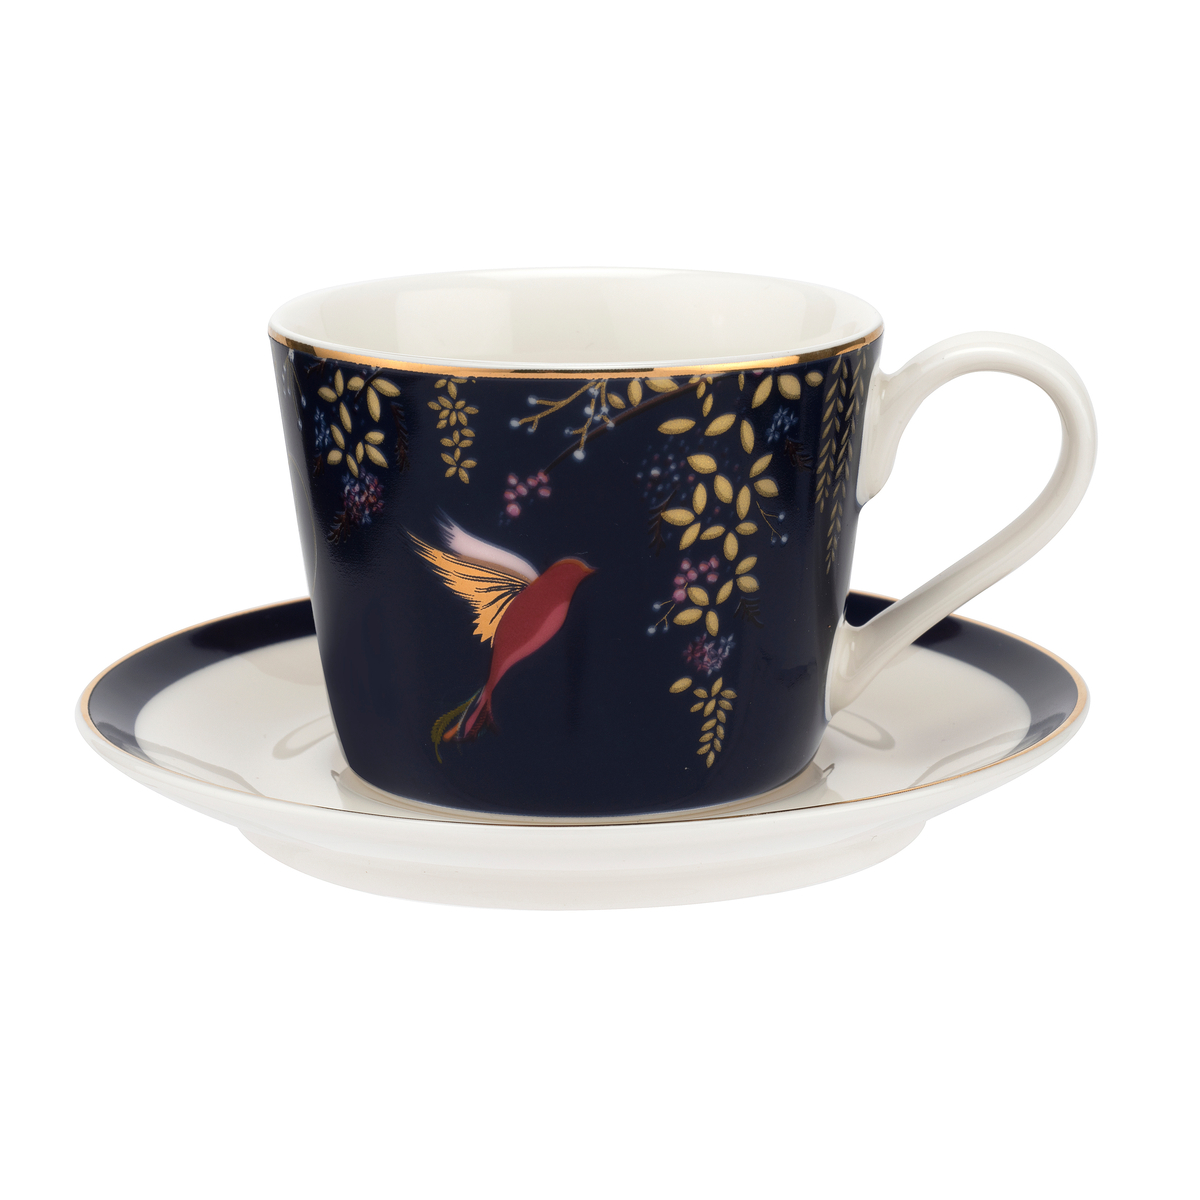 Sara Miller Chelsea Teacup and Saucer Navy image number null